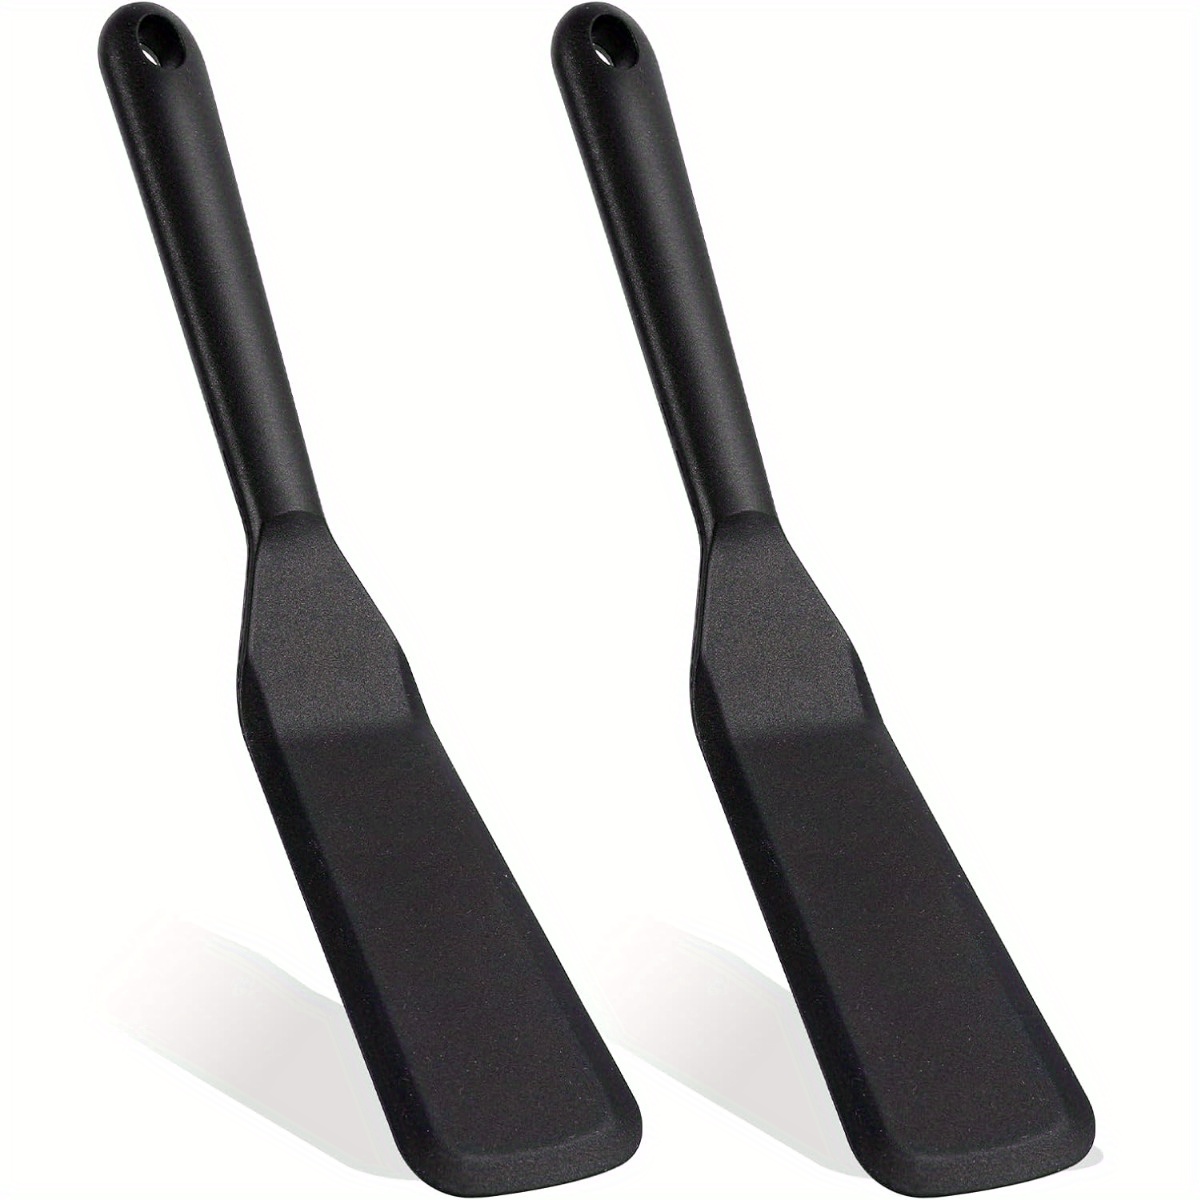 2 Pieces Omelette Spatula Kitchen Omelet Turner Silicone Omelette